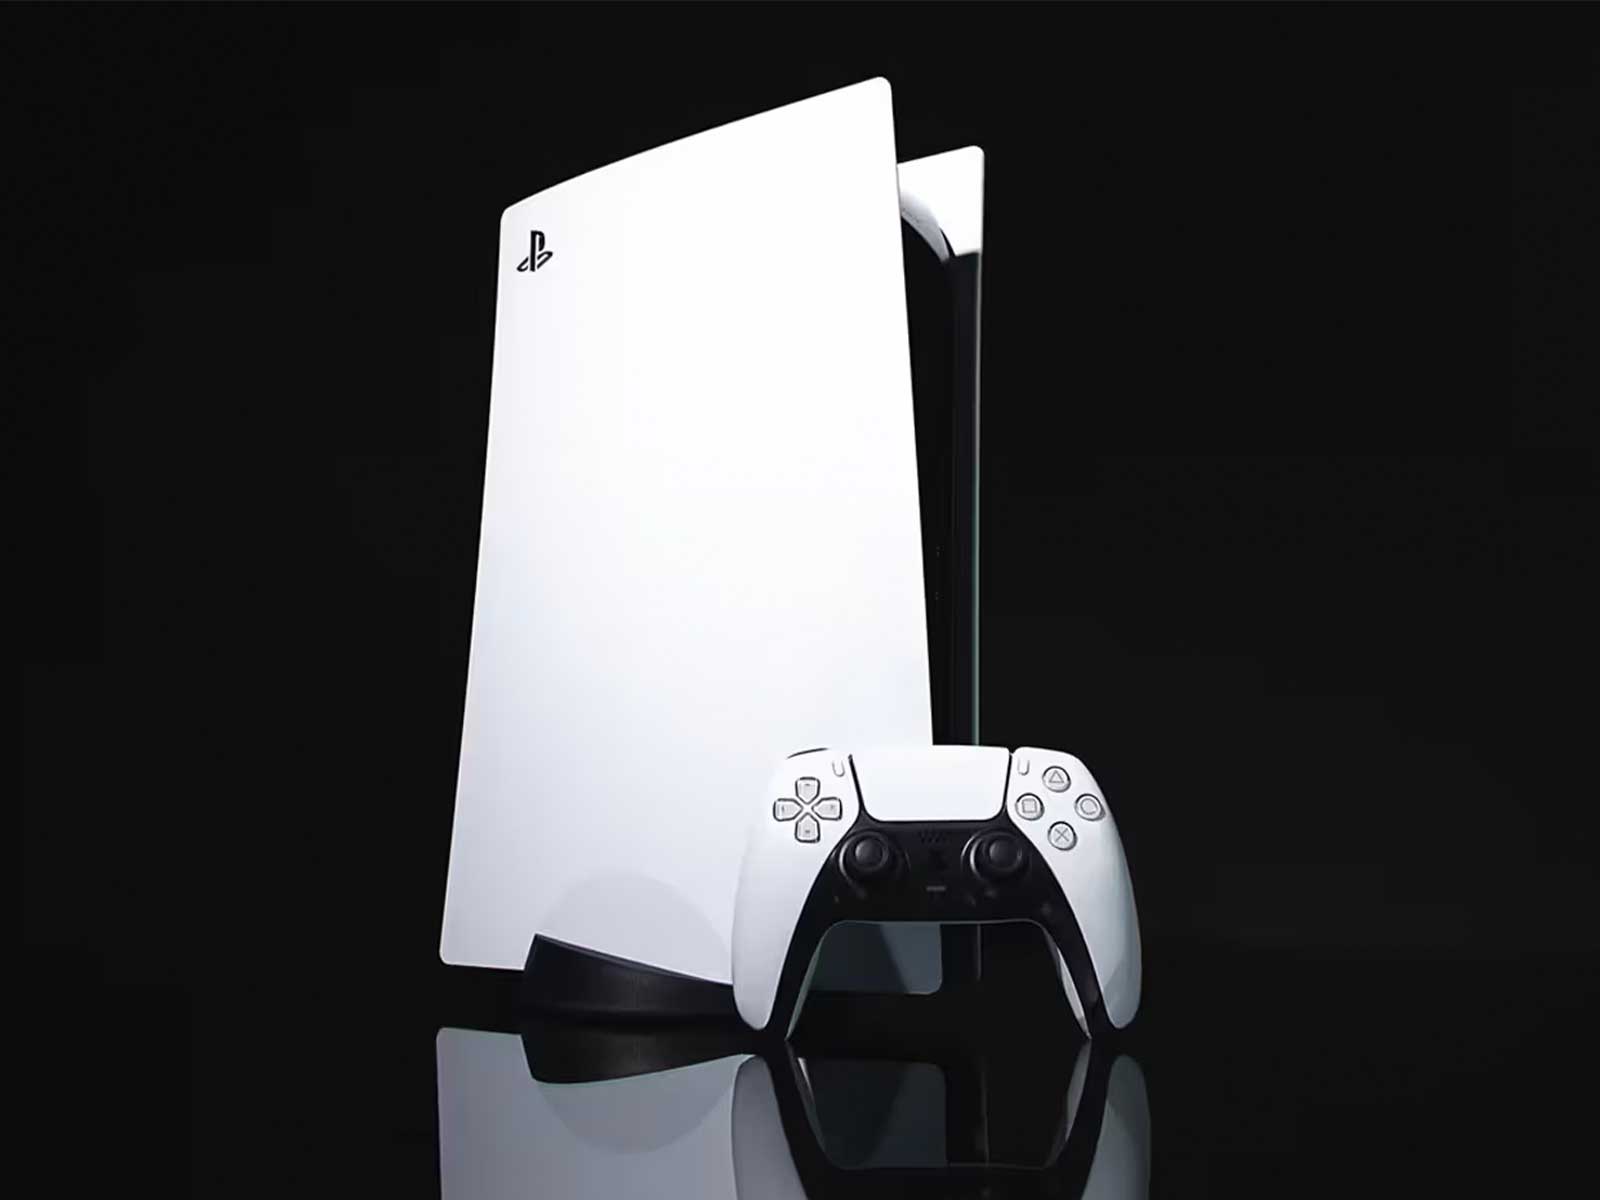 The PlayStation 5 Slim is Launching Later This Year According to